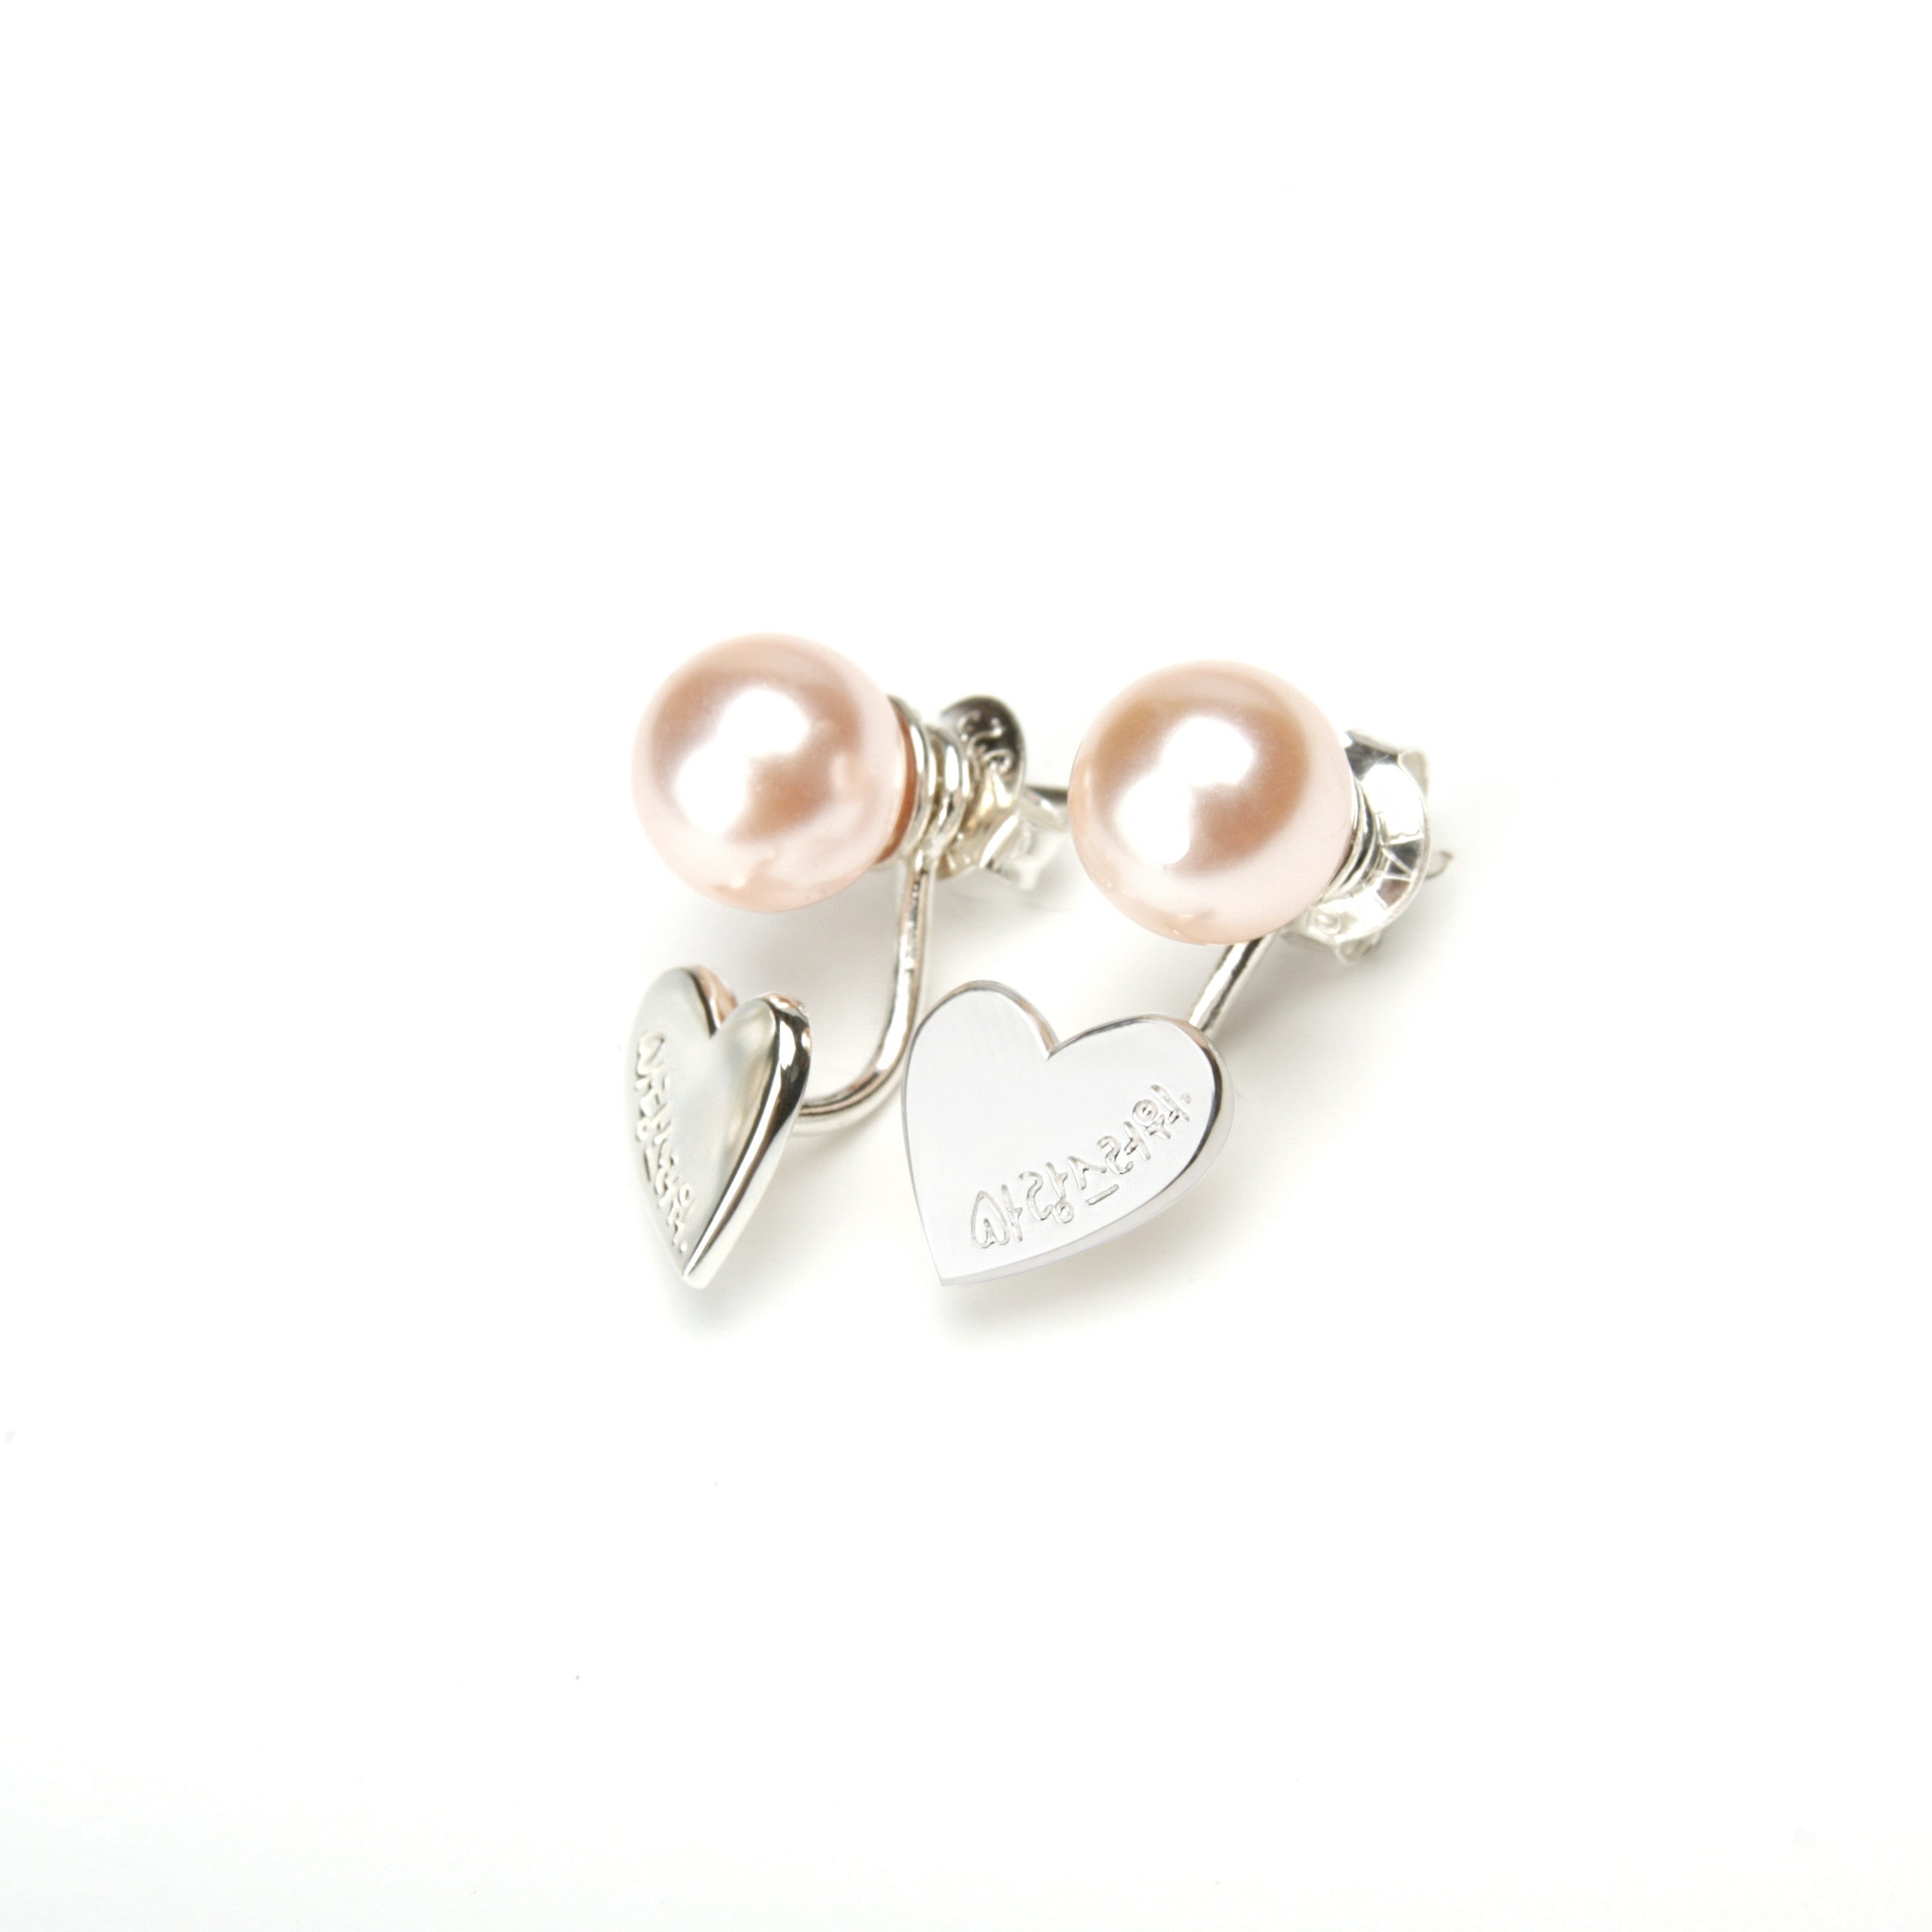 You are Lovely Earrings Peach Pearl